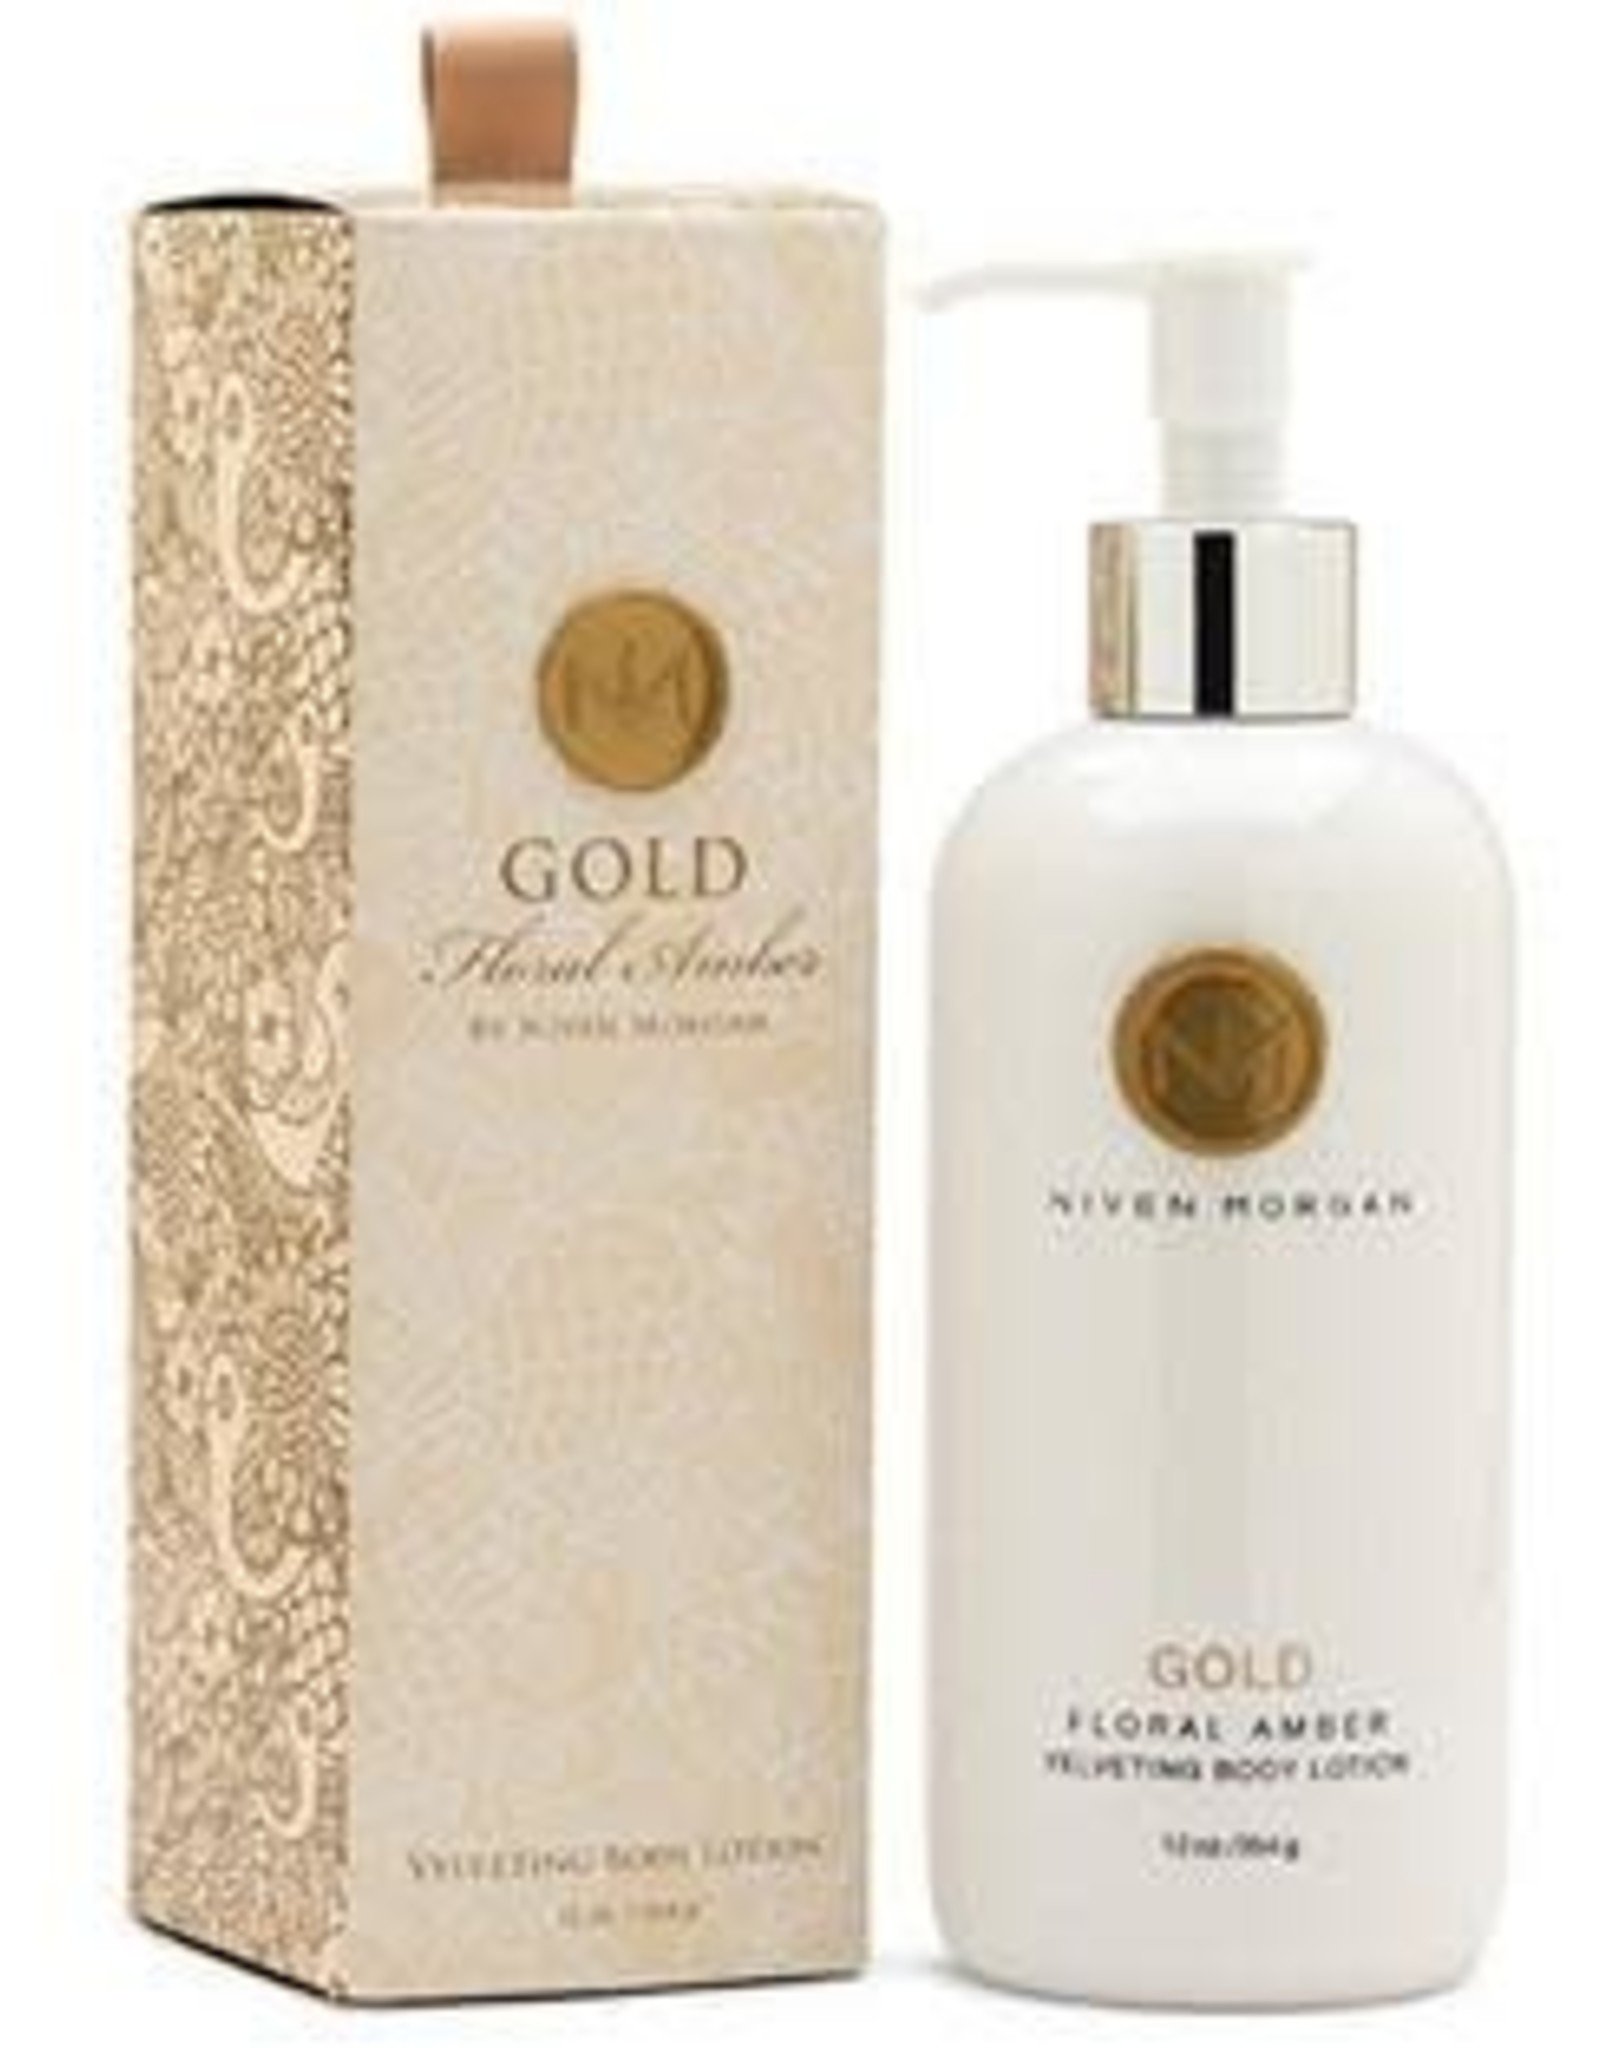 NM Gold Body Lotion